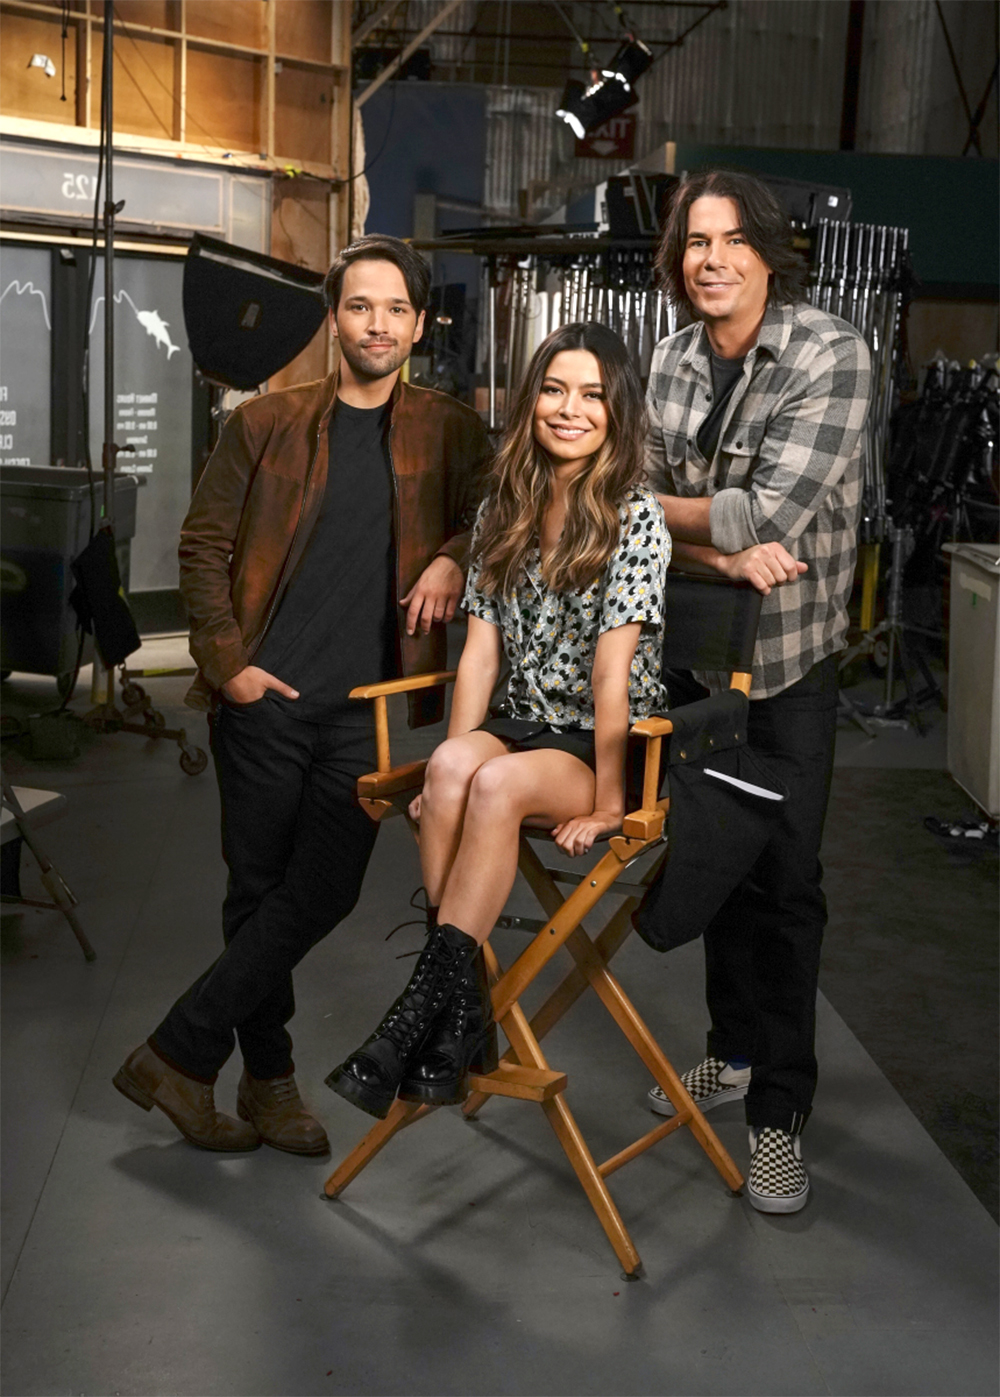 iCarly revival with Miranda Cosgrove and original stars in the works